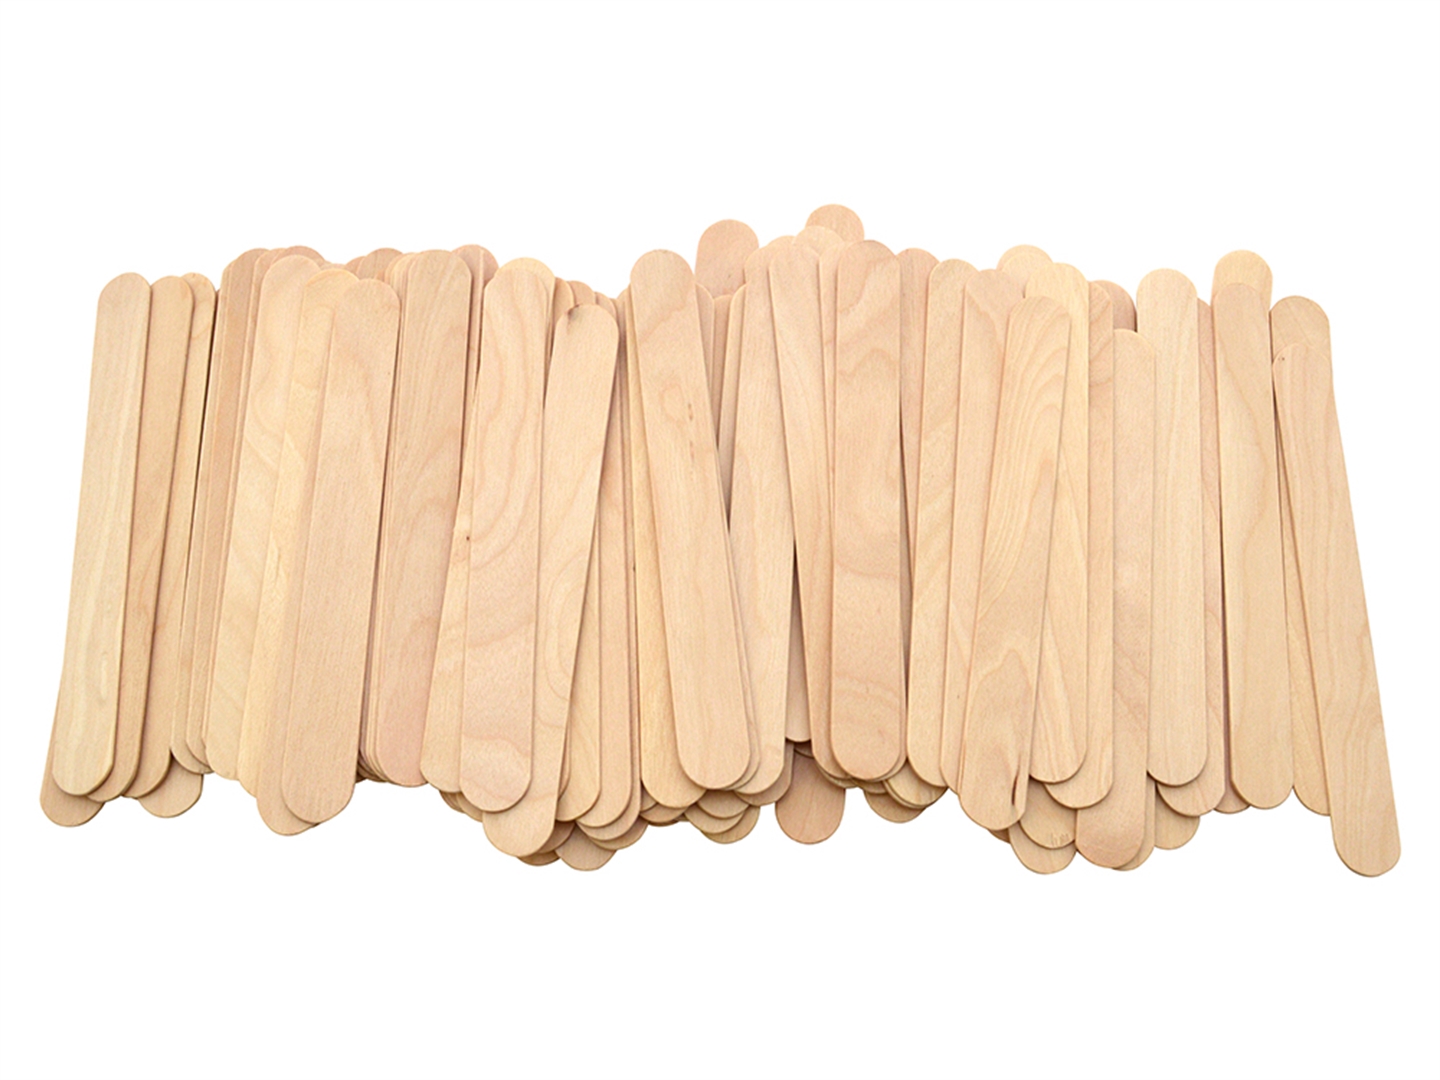 100 Wooden Mixing Spatula's Upol